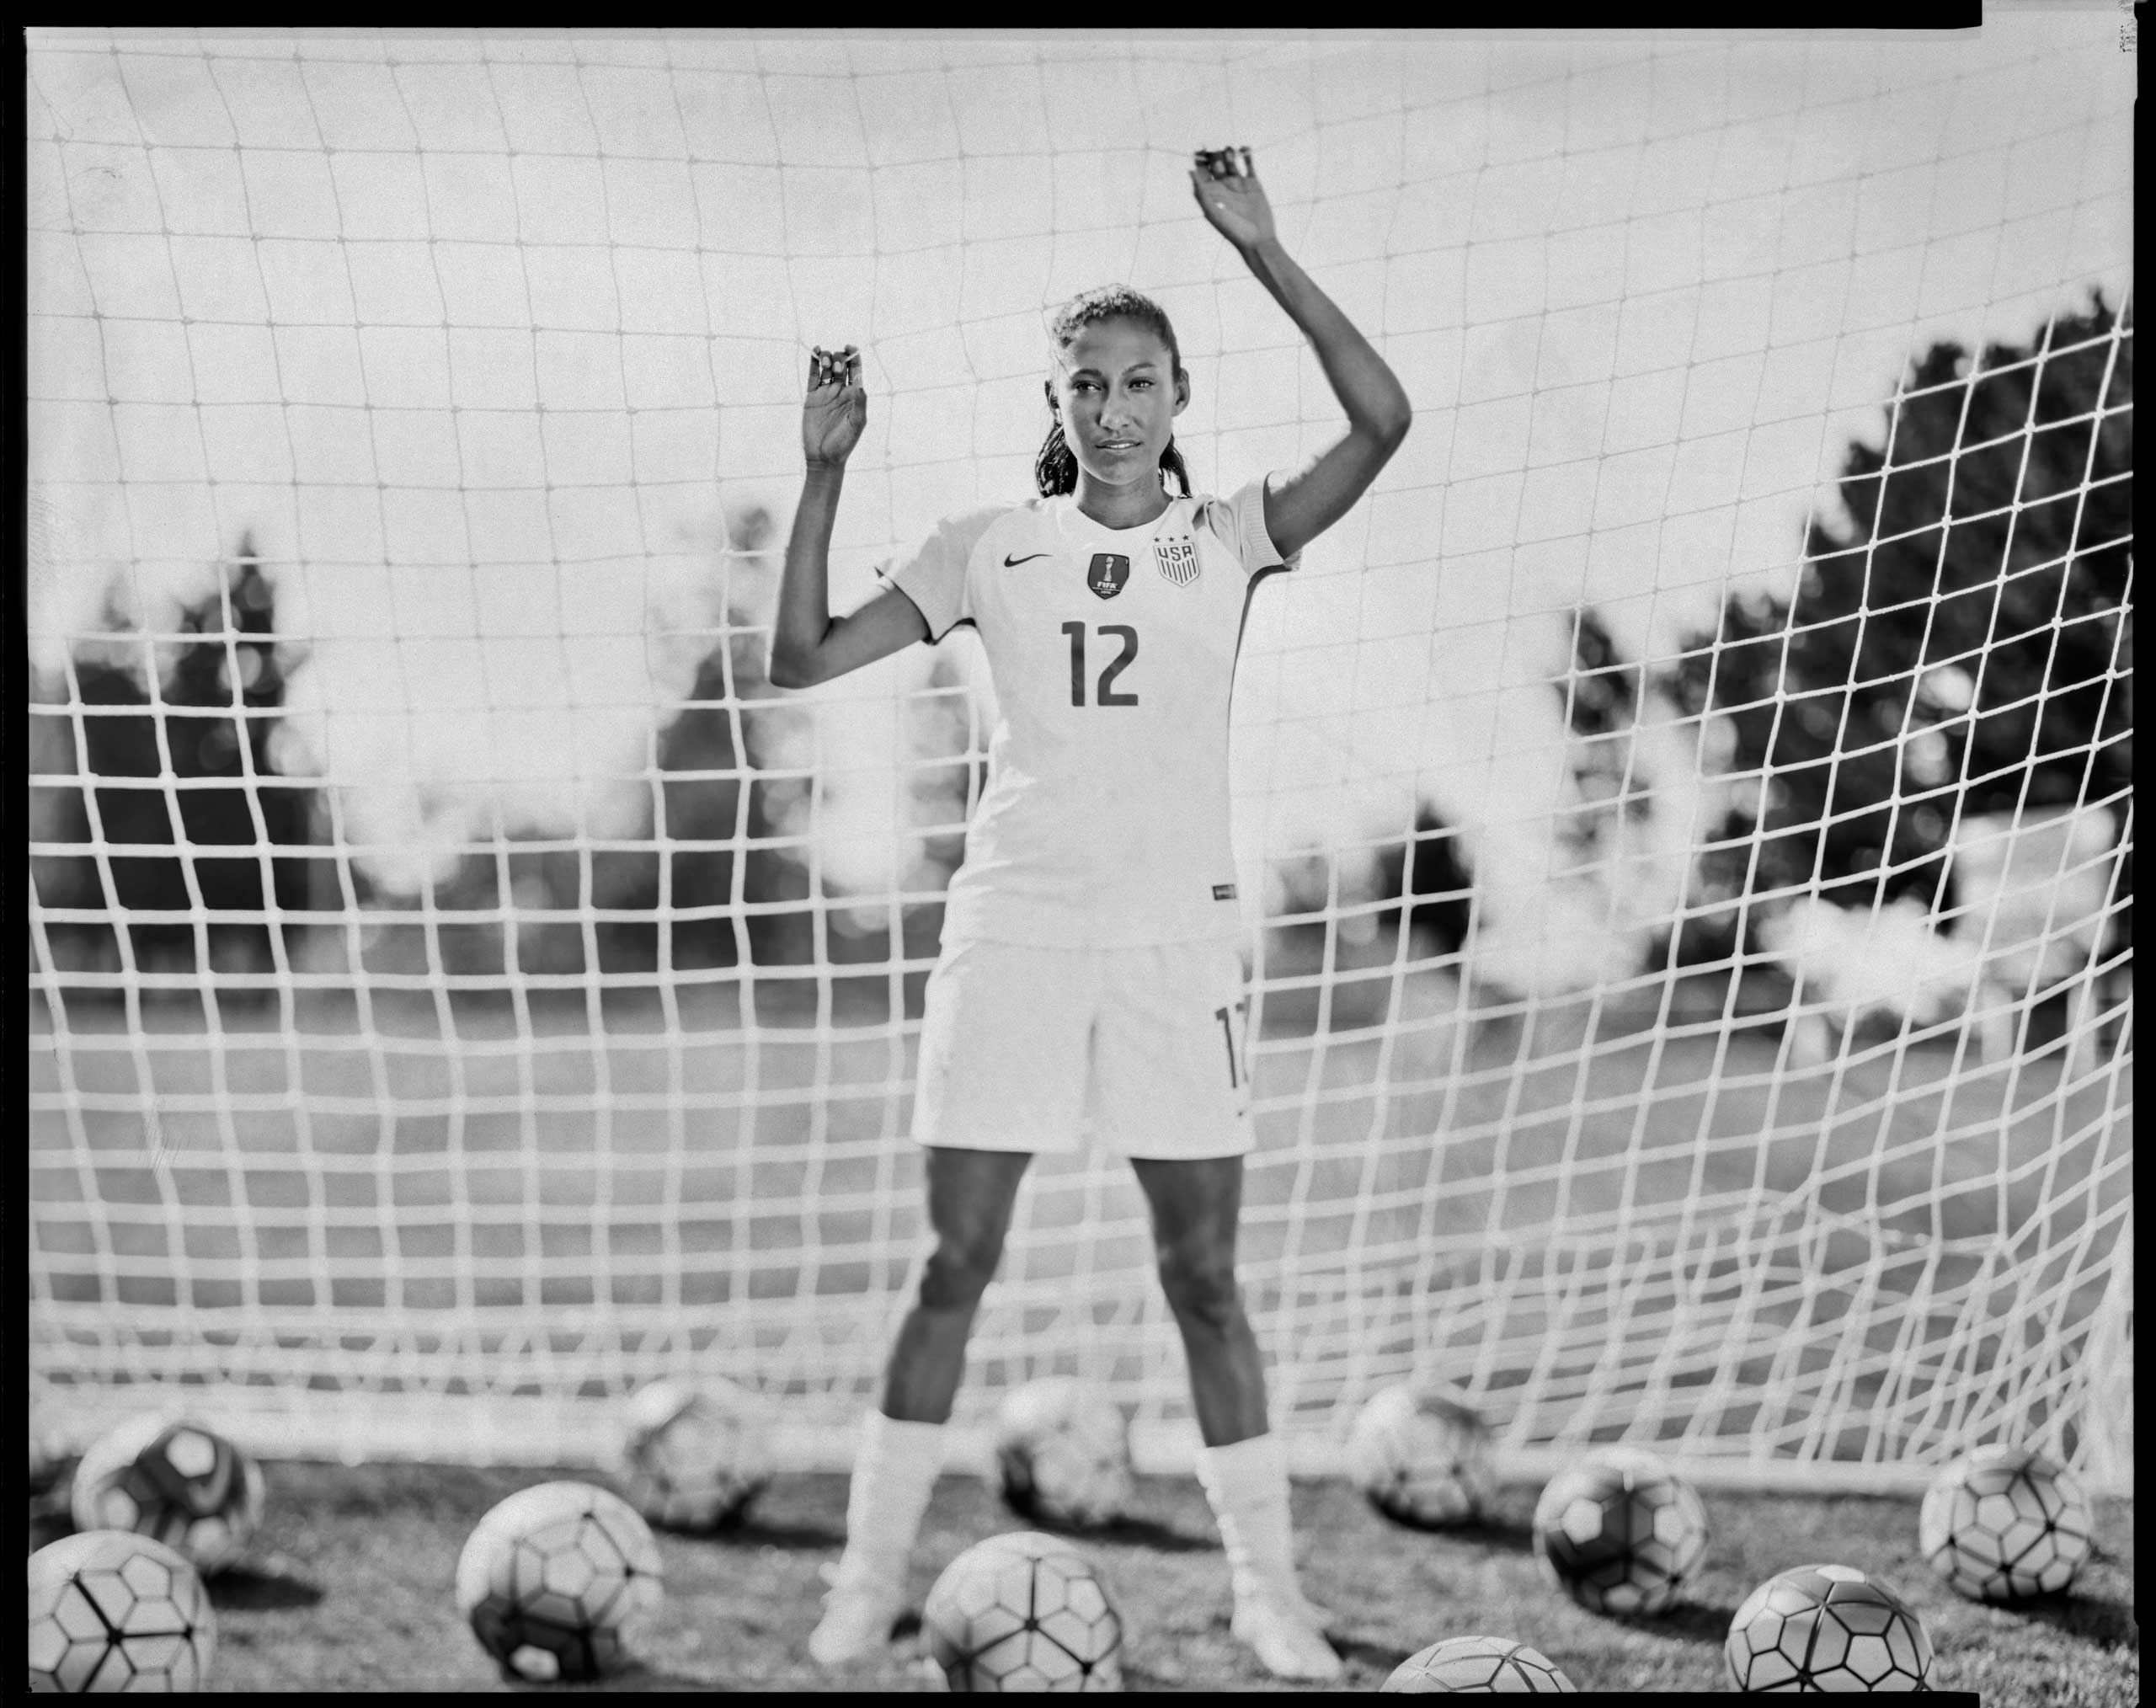 Christen Press, a forward with the Women's National Team, will compete at the 2016 Rio Olympics and is photographed at Chadwick School, where she is an alumni, in Palos Verdes, Calif.